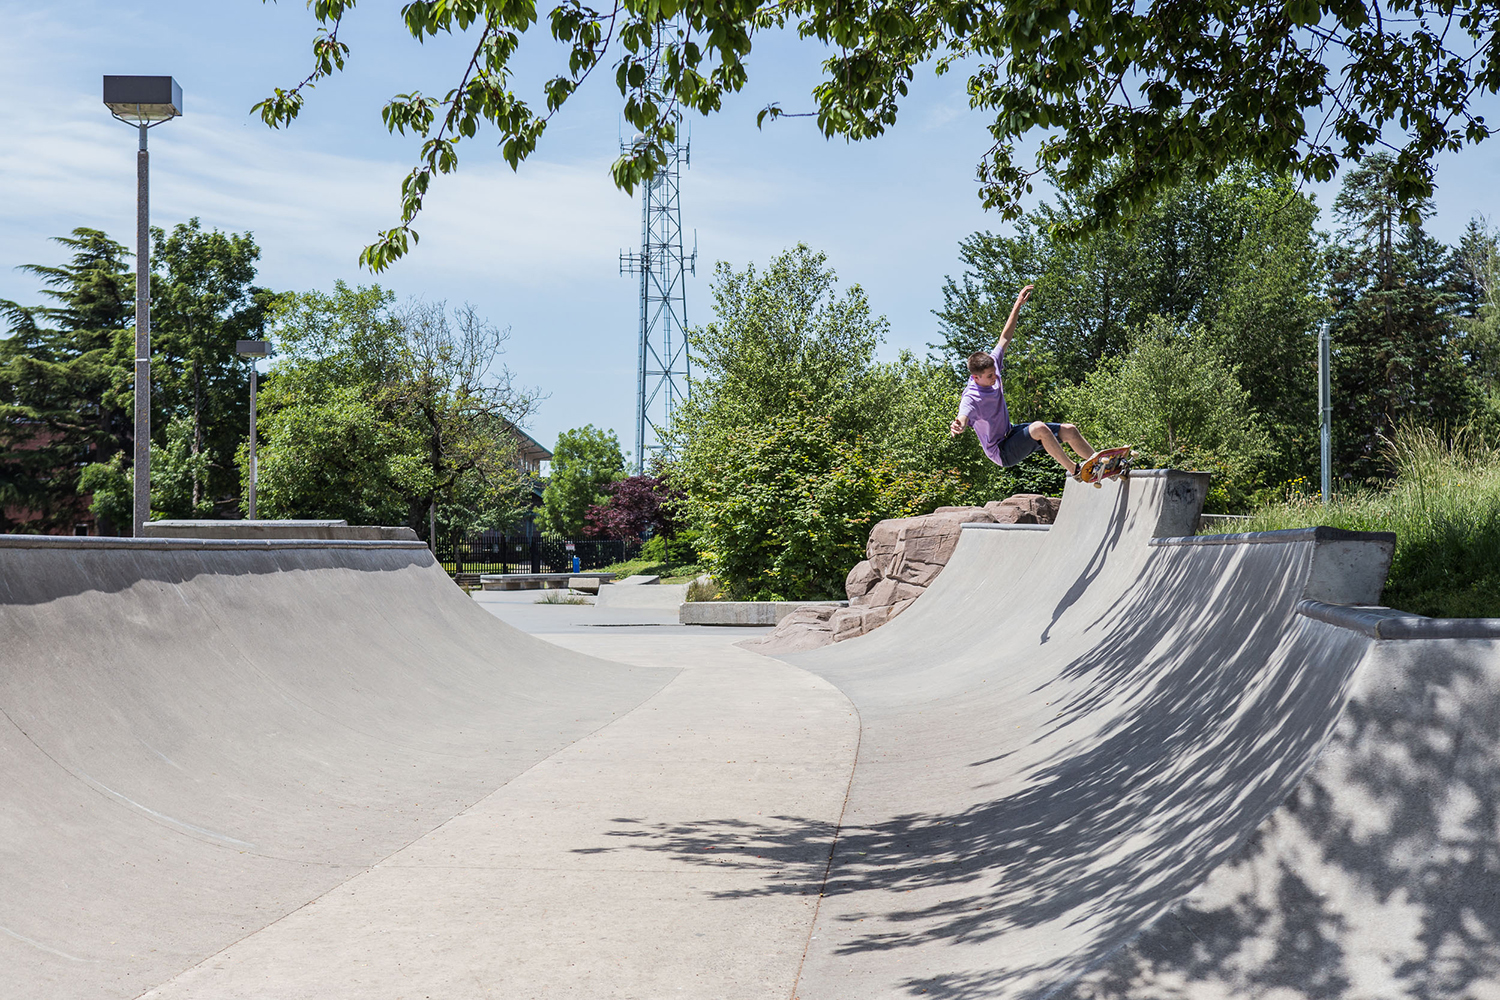  The transitioned “mini ramp” section of Ed Benedict Skate Plaza is a great place to refine one’s transition skills. 